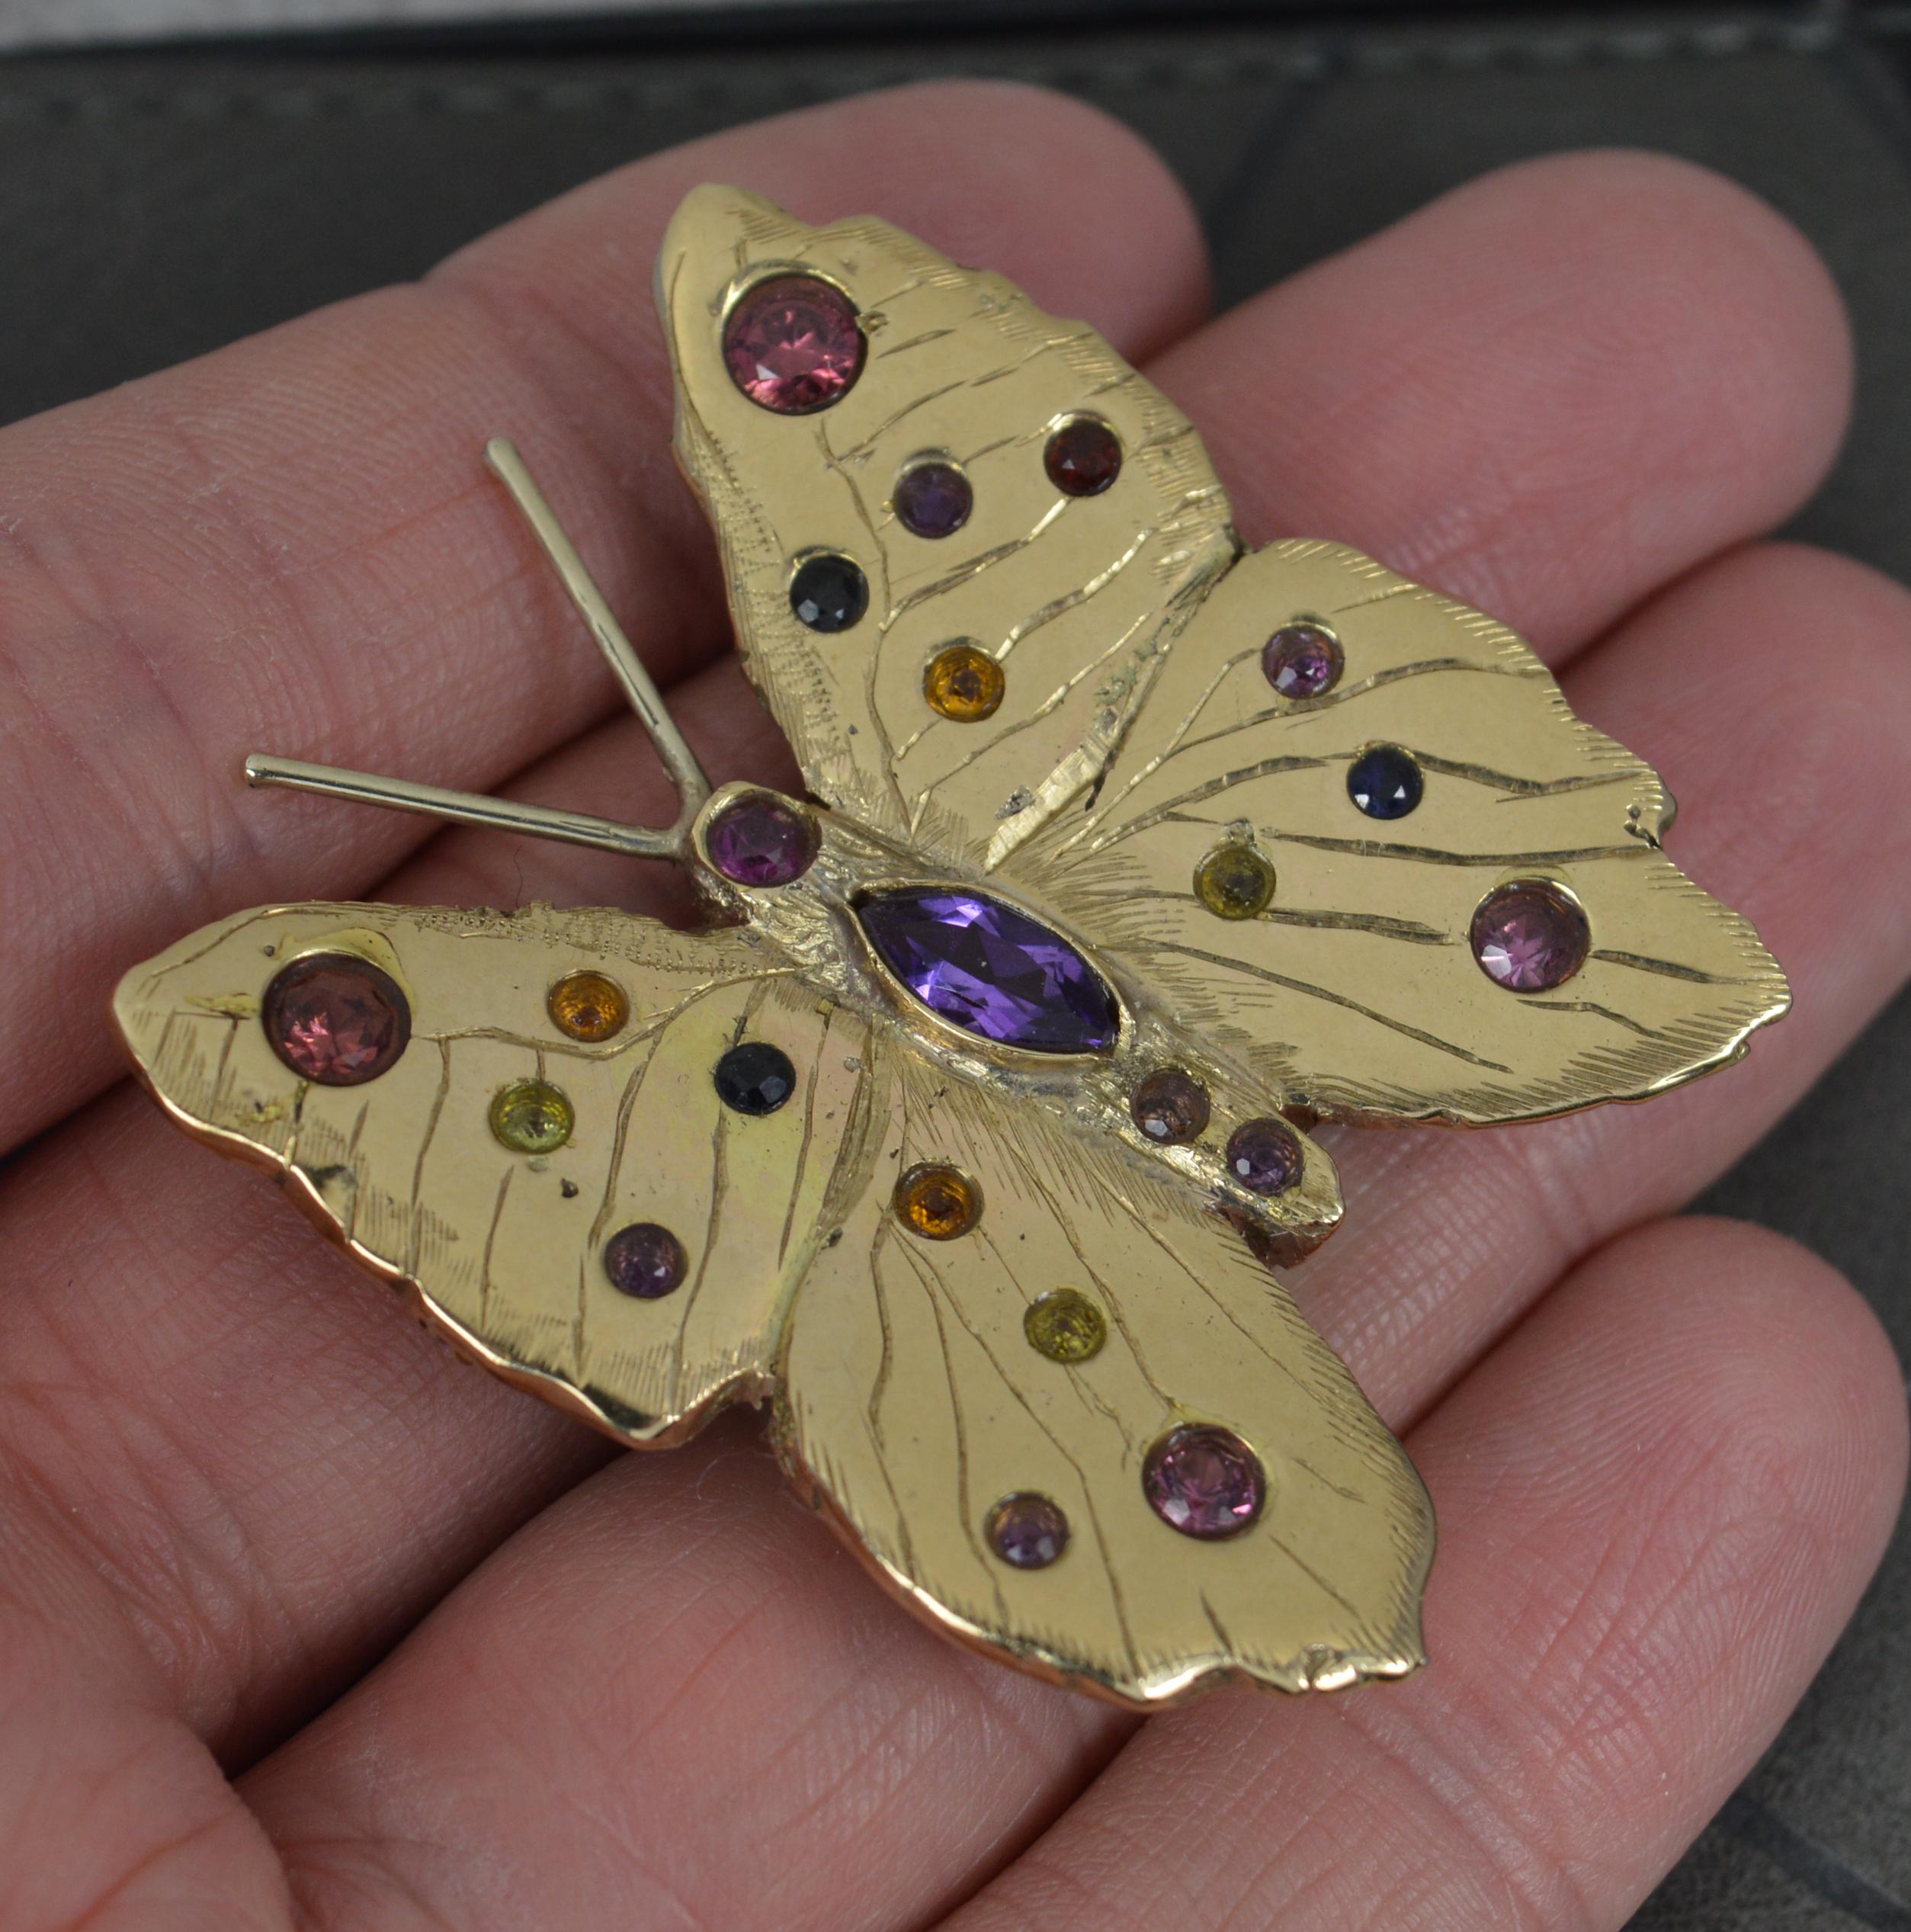 A very well made, heavy 9ct gold butterfly.
9 carat yellow gold.
Encrusted with many natural gemstones, various colours. Amethyst, tourmaline, citrine, sapphire etc.
CONDITION ; Excellent. Very crisp design. Well set, clean stones. Working brooch.